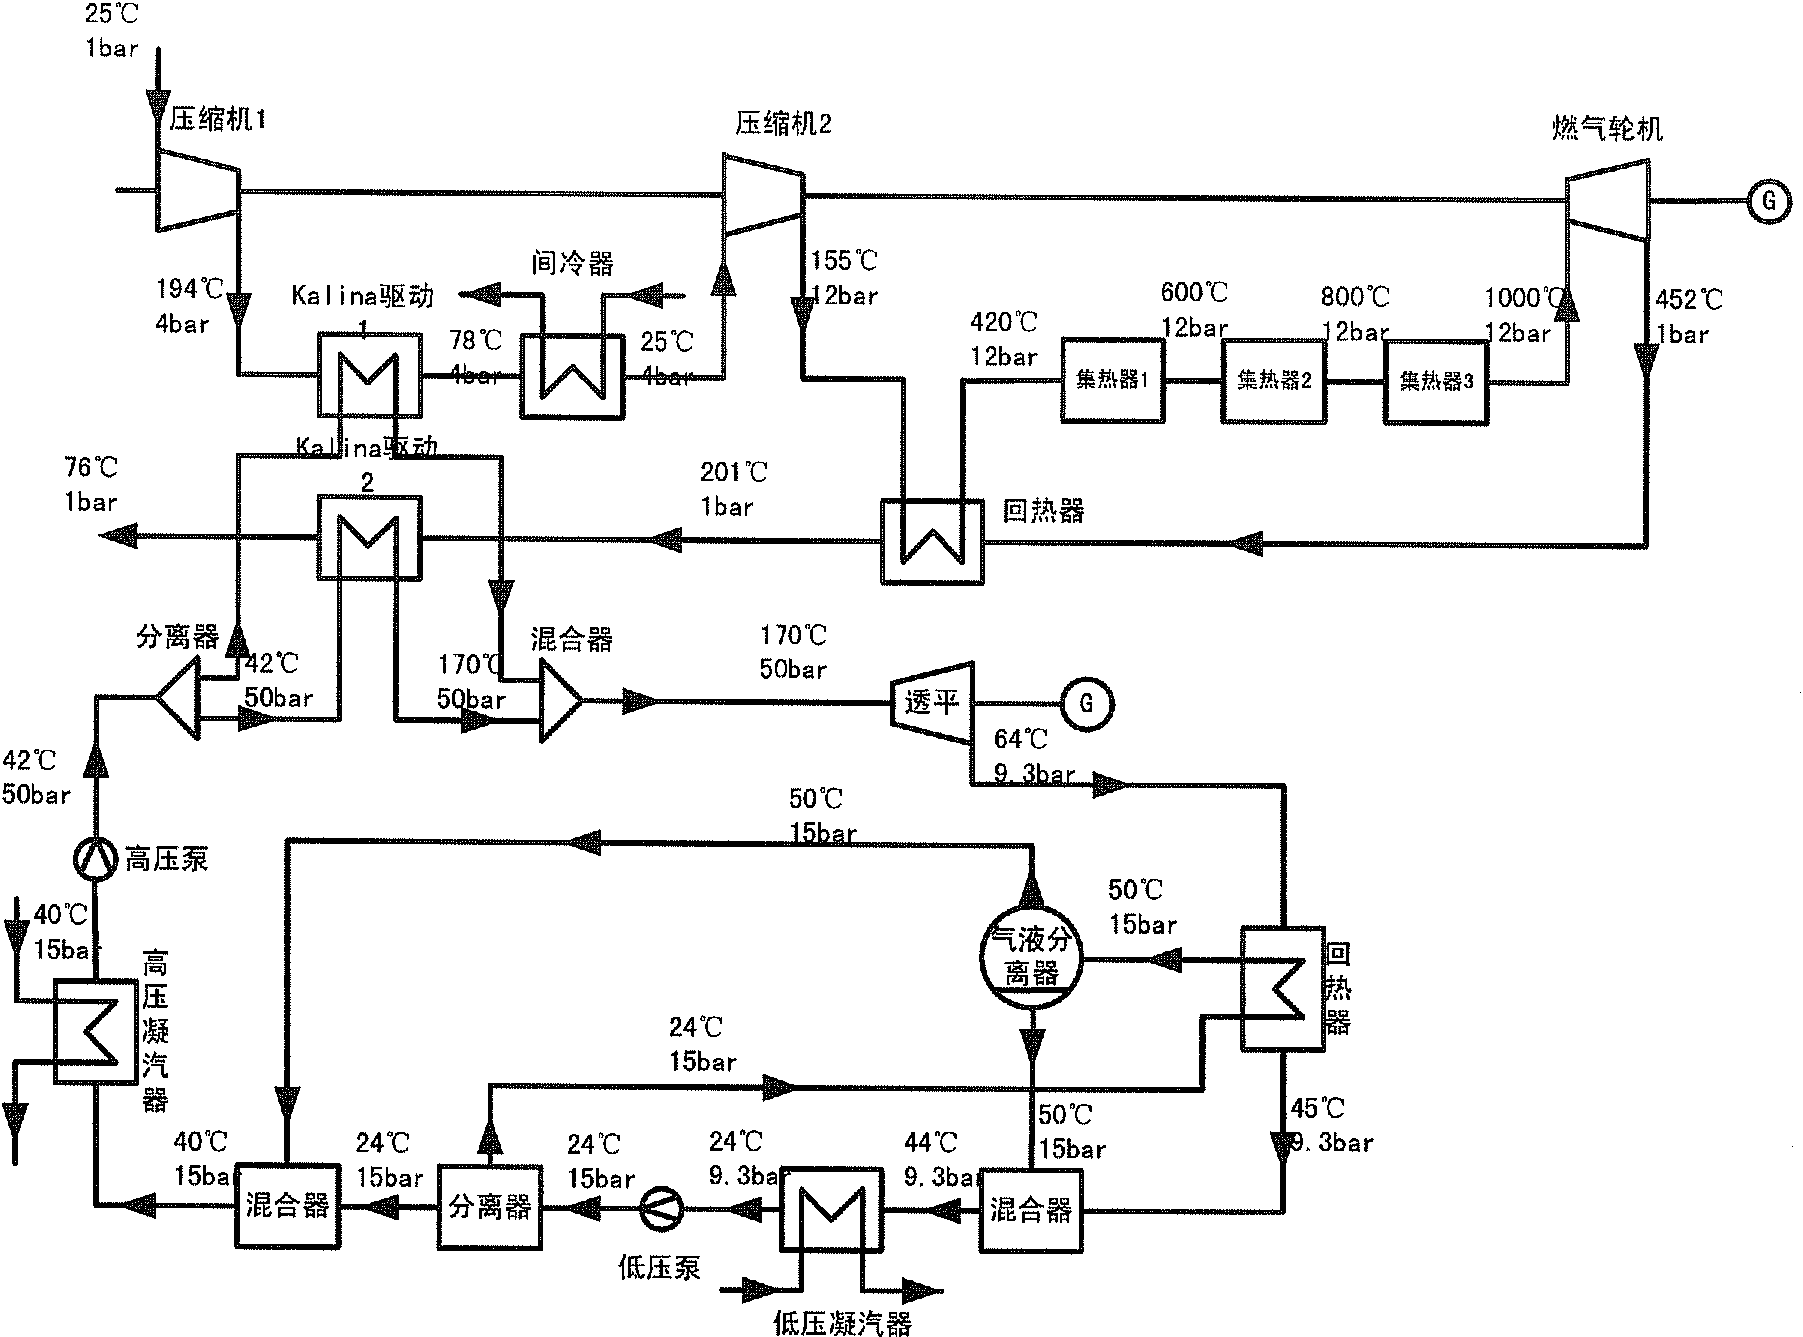 Thermal power generation system combined by water saving type solar combustion gas turbine and kalina cycle